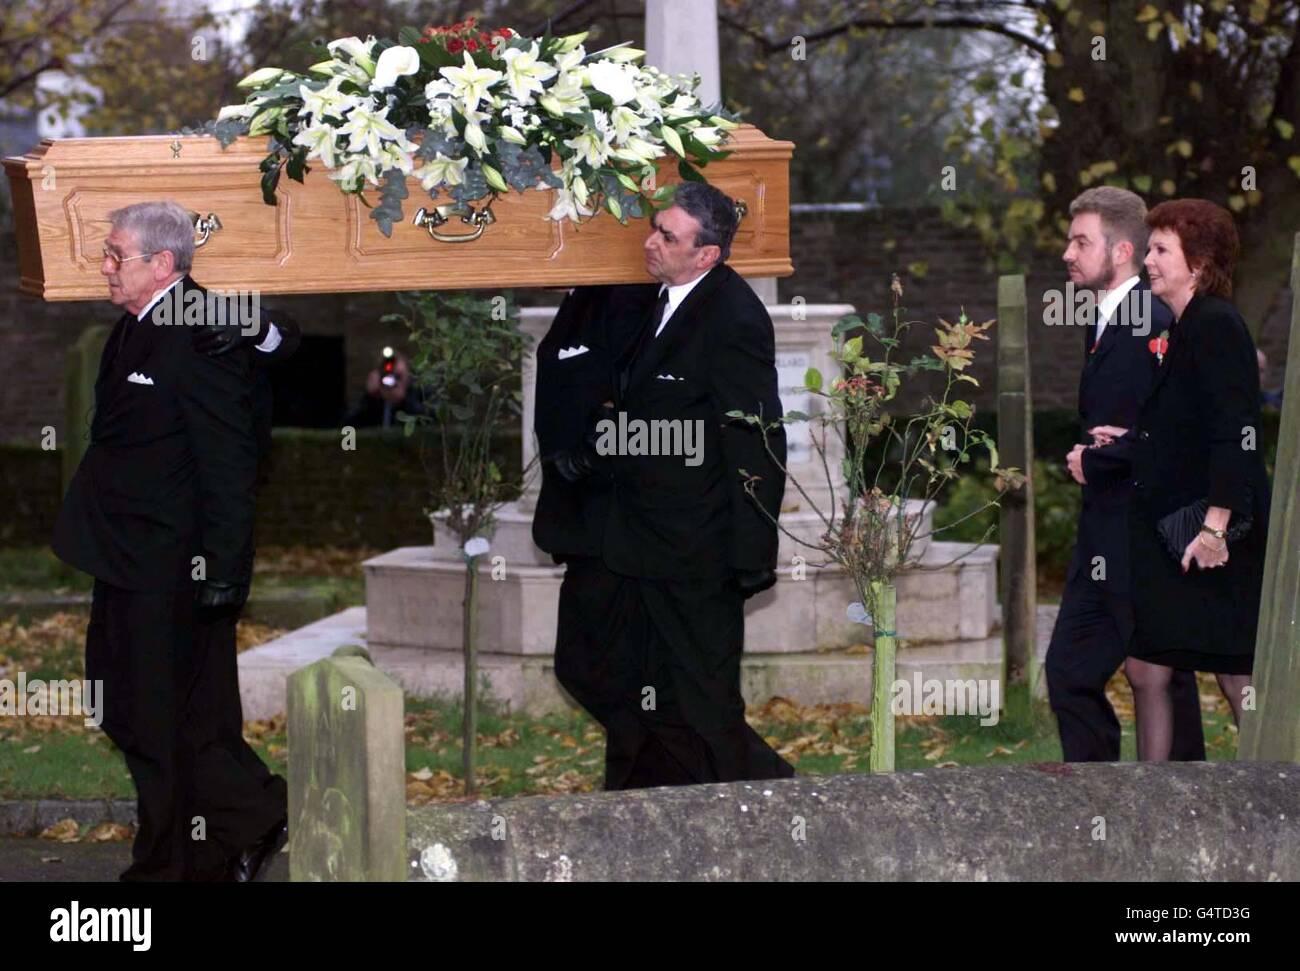 Blind Date presenter Cilla Black (far right) arrives with her son Robert (2nd right), for the funeral of her husband Bobby Willis at St. Mary the Virgin Church in Denham, Buckinghamshire. Willis died 27/10/99 after a battle with liver and lung cancer, aged 57. Stock Photo